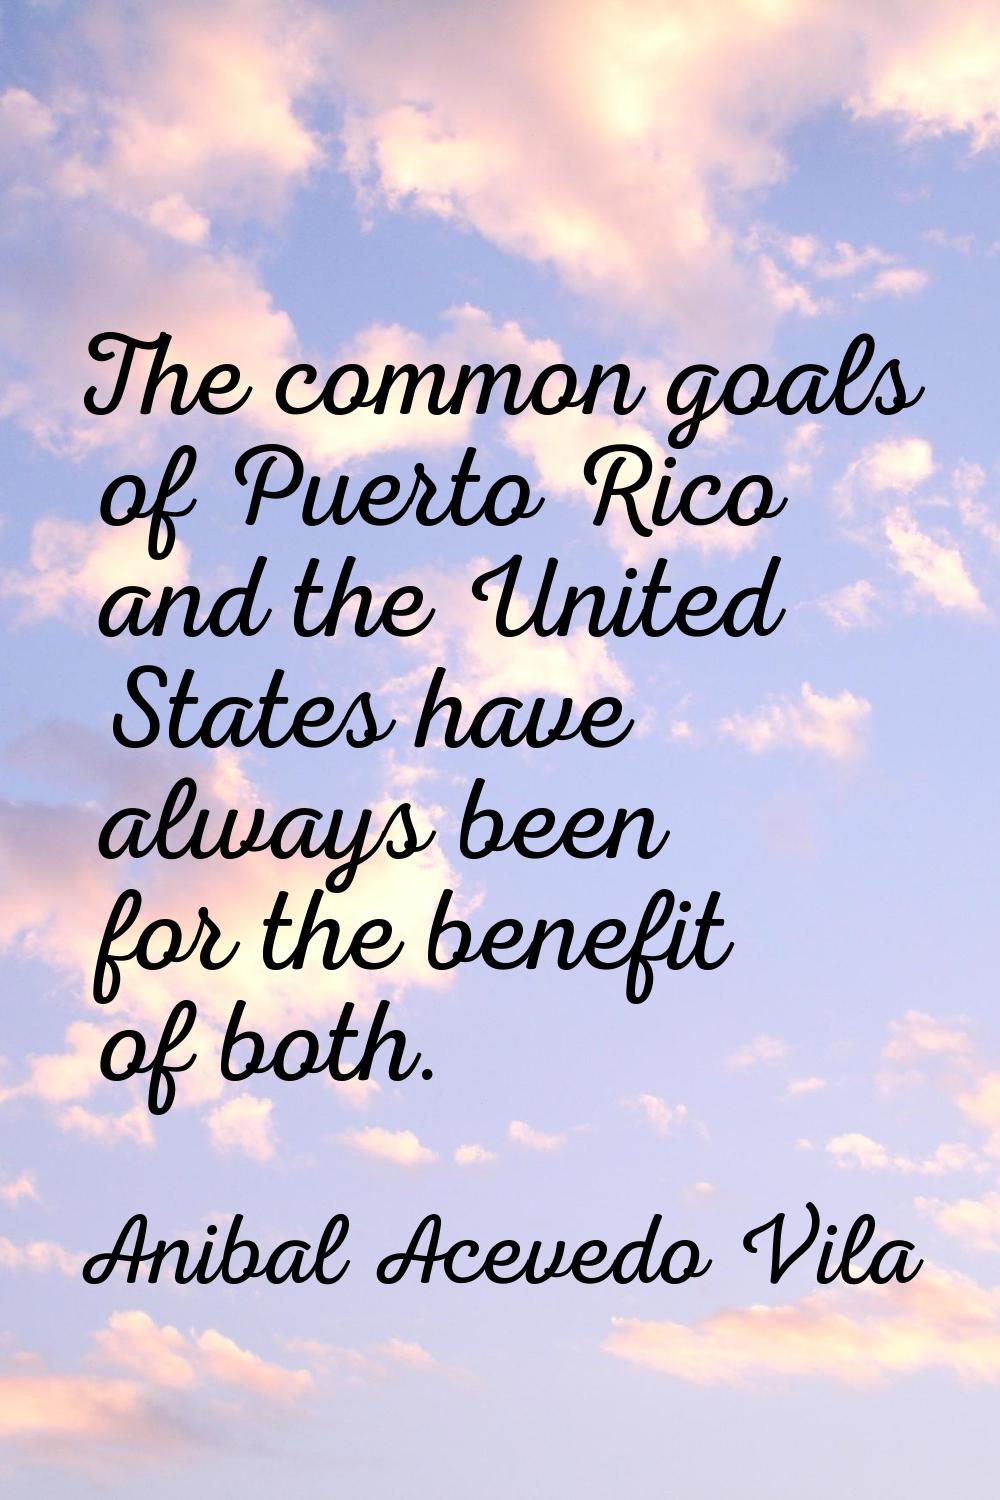 The common goals of Puerto Rico and the United States have always been for the benefit of both.